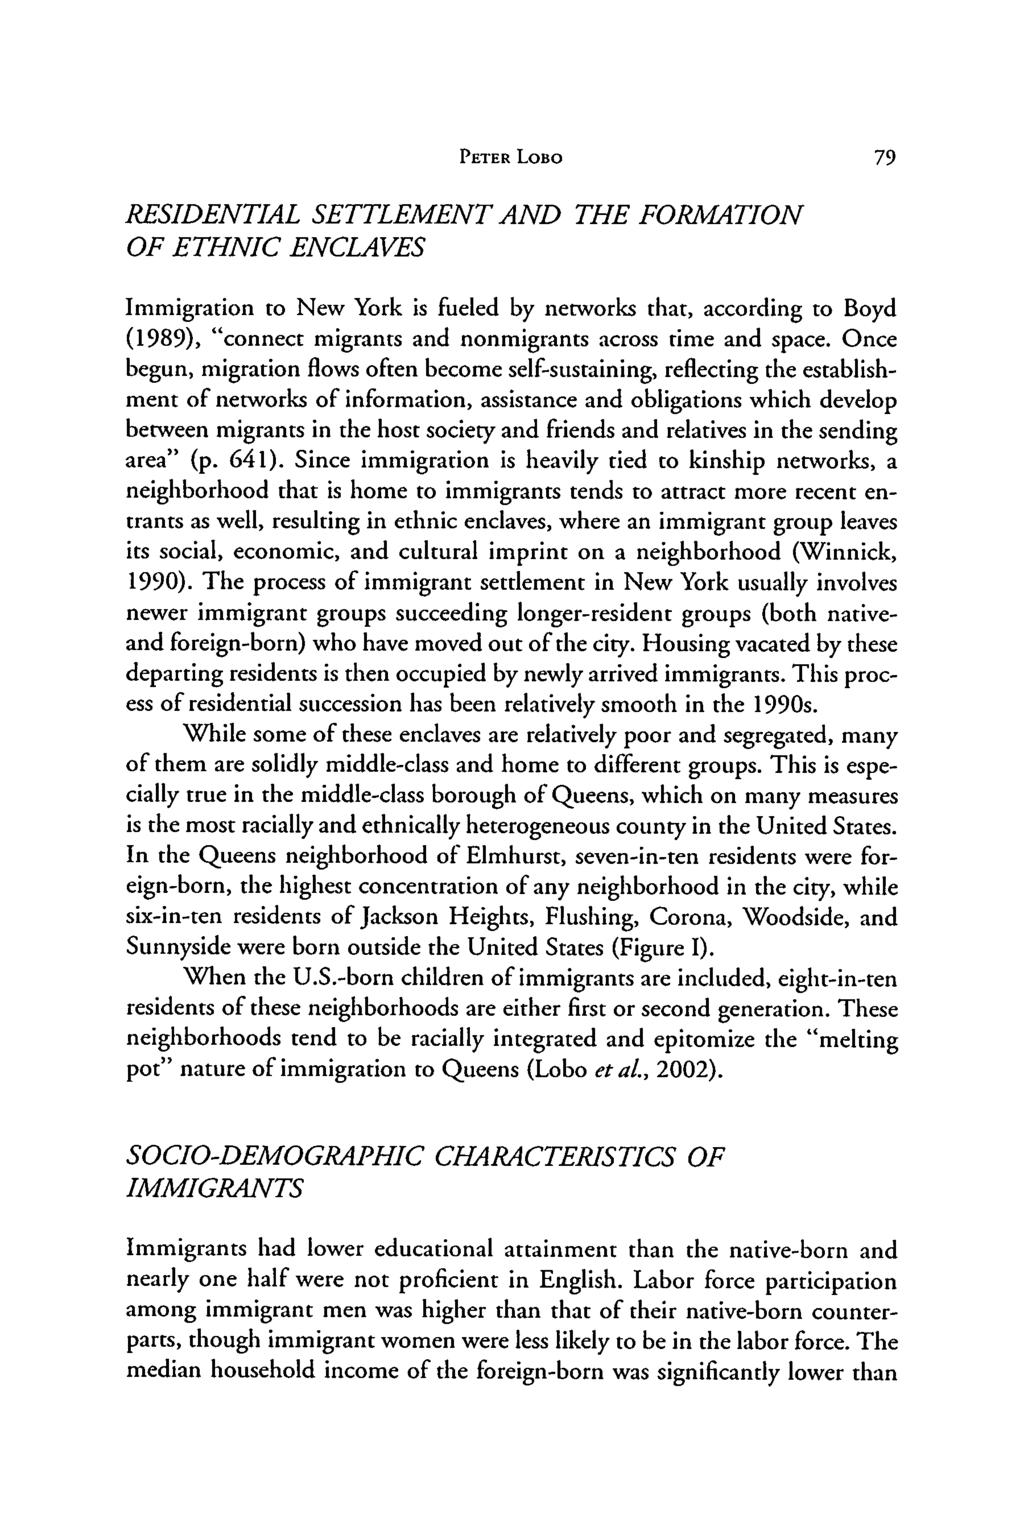 PETER LOBO 79 RESIDENTIAL SETTLEMENT AND THE FORMATION OF ETHNIC ENCLAVES Immigration to New York is fueled by networks that, according to Boyd (1989, connect migrants and nonmigrants across time and